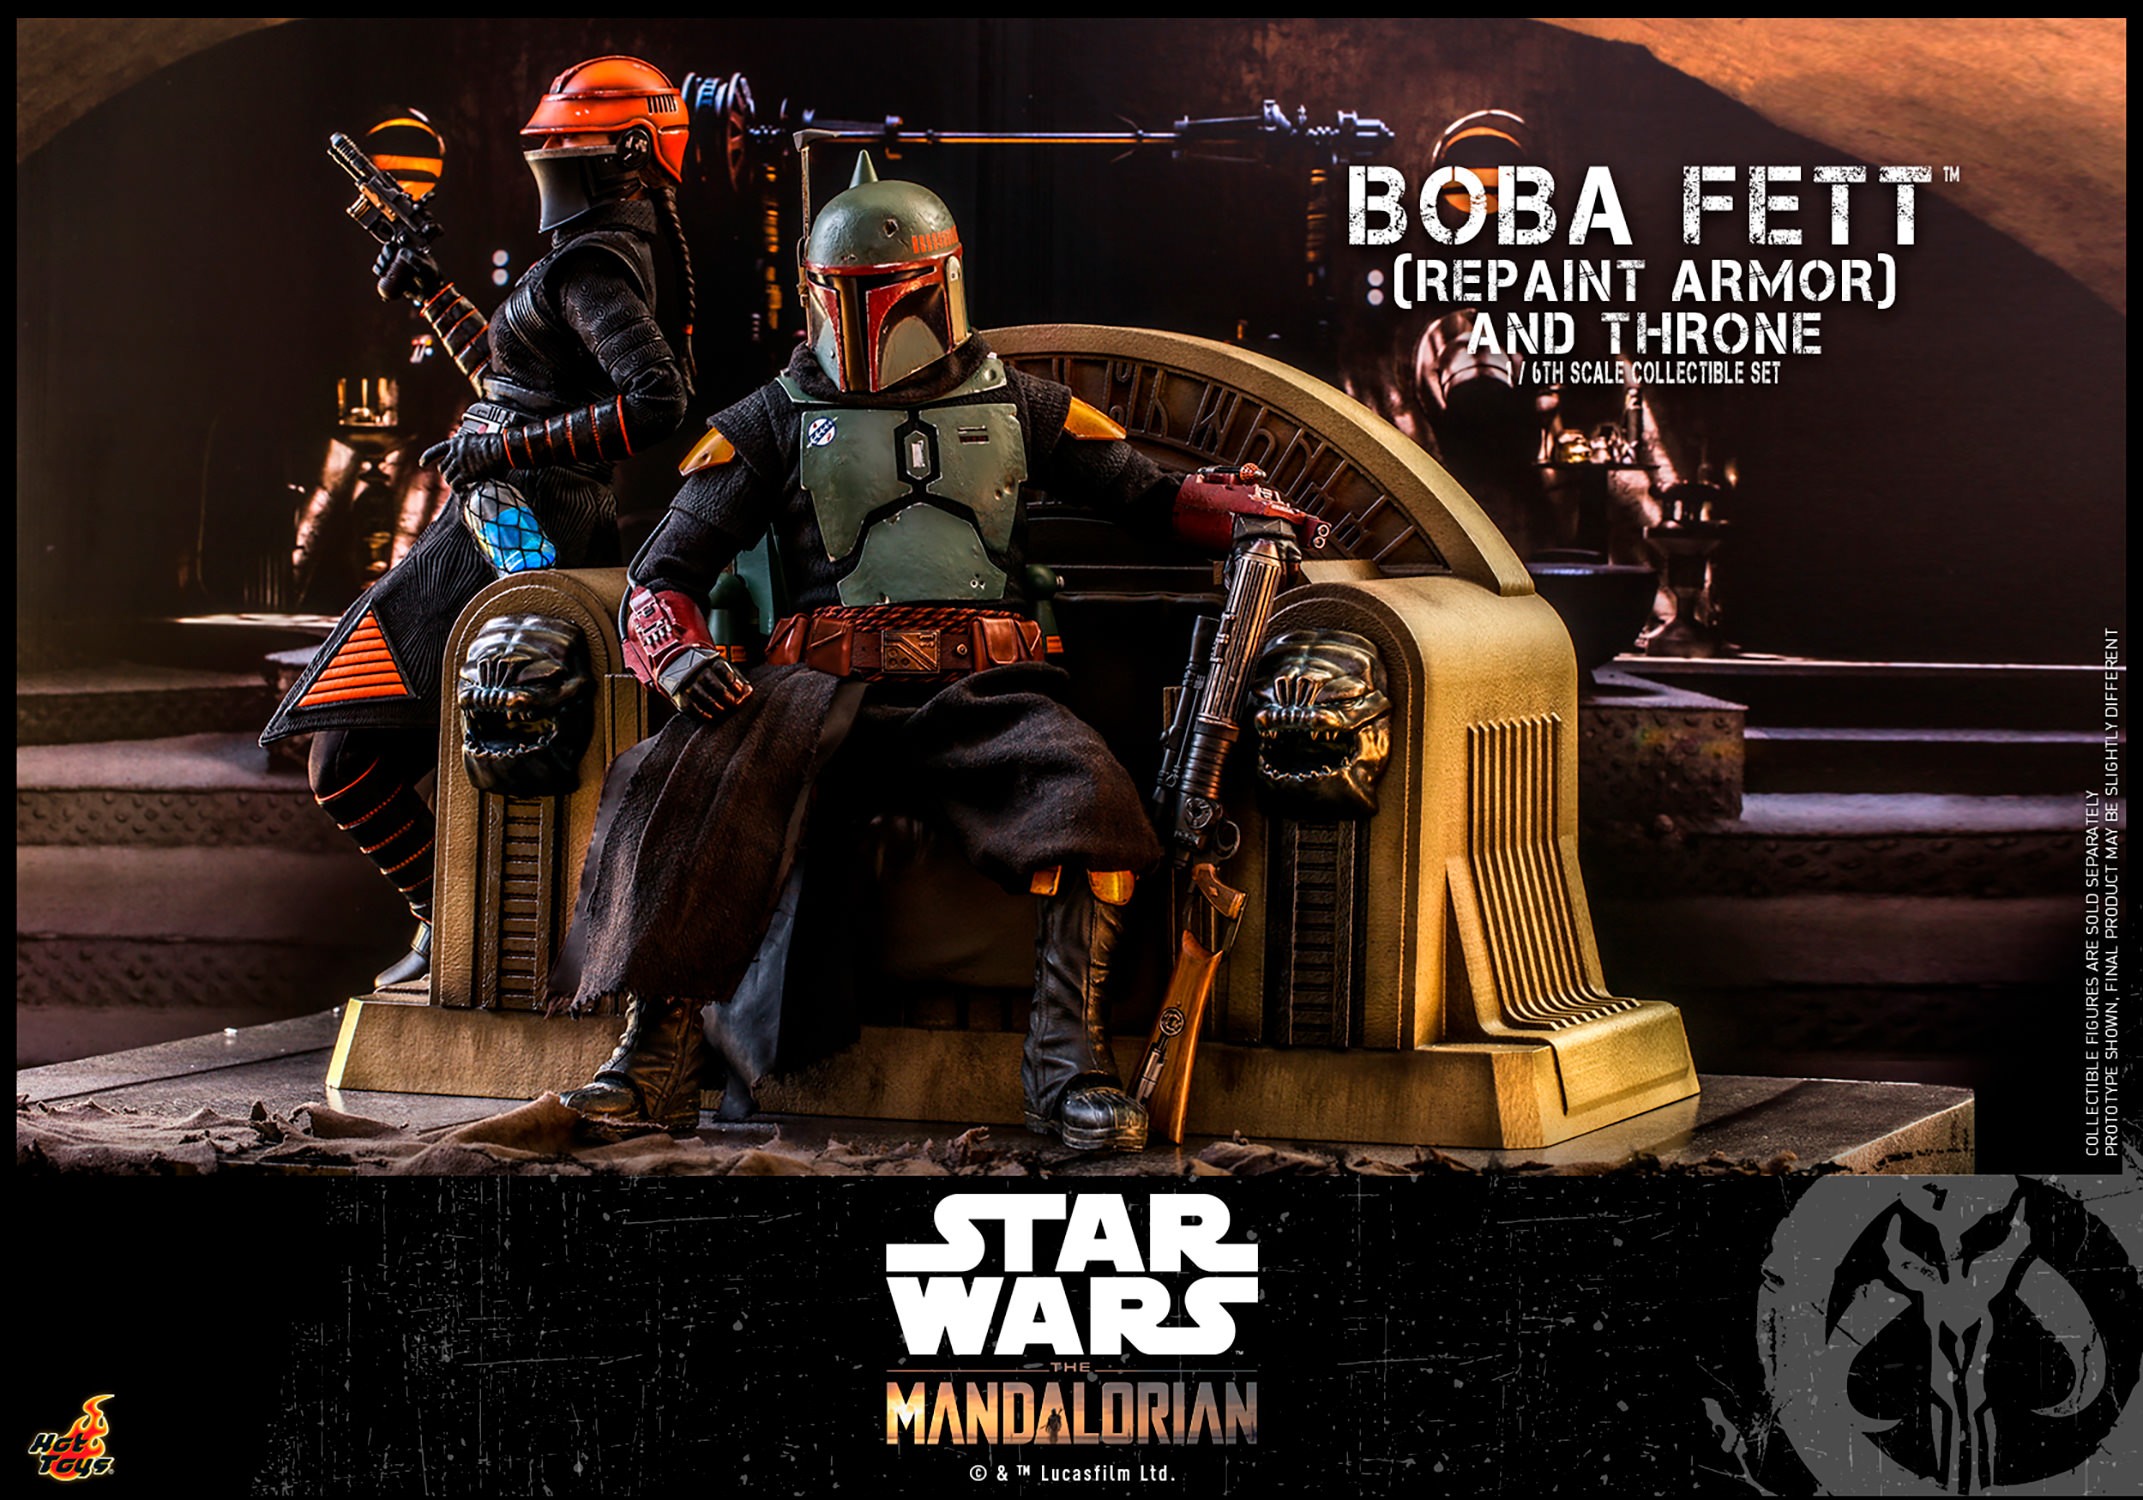 Boba Fett Repaint Armour and Throne Set™ - Sixth Scale Figure Set by Hot Toys